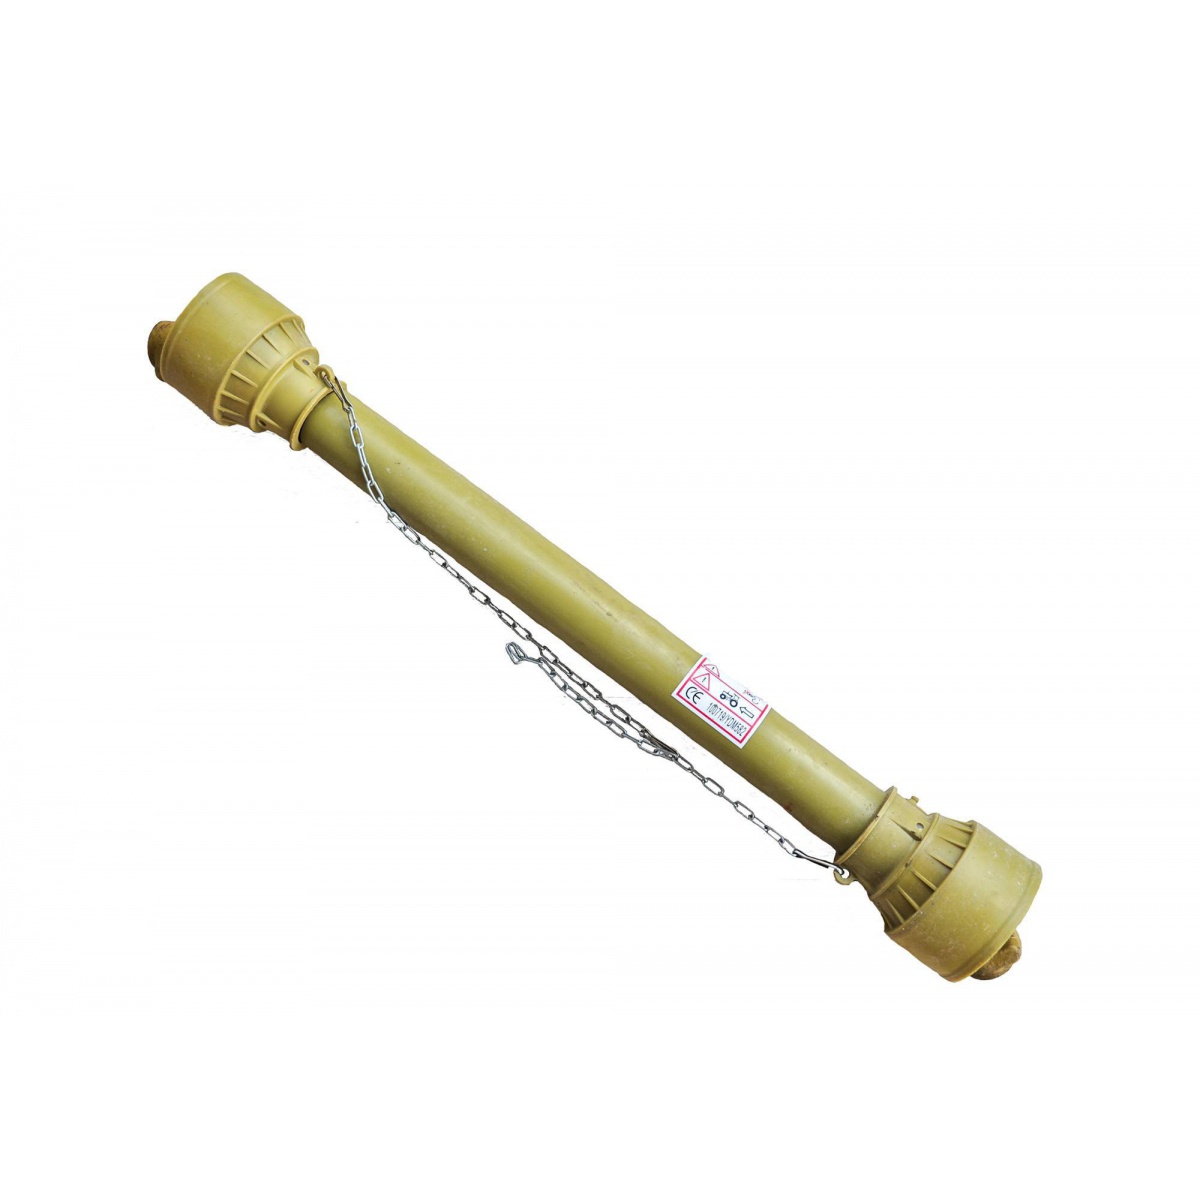 025b up to 24km and 130nm - PTO shaft 025B - 50cm / up to 24 HP